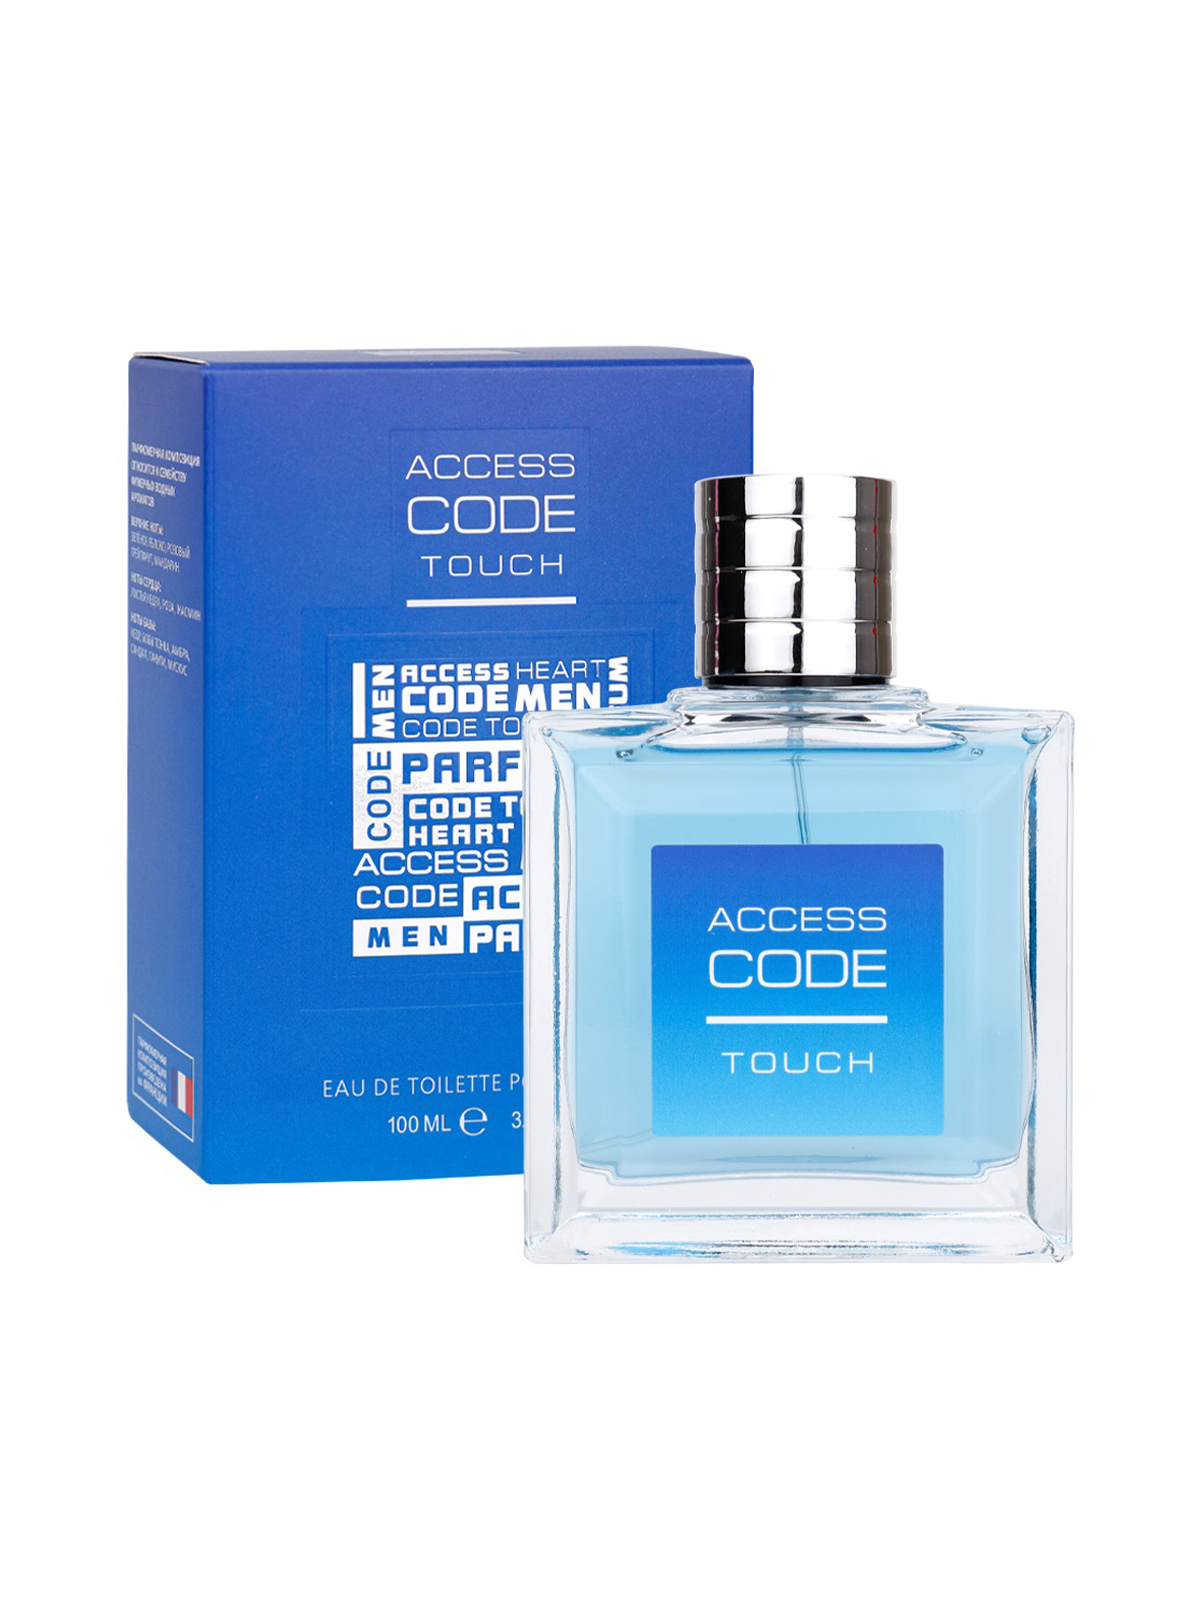 Т.в. Access Code Touch 100ml for men